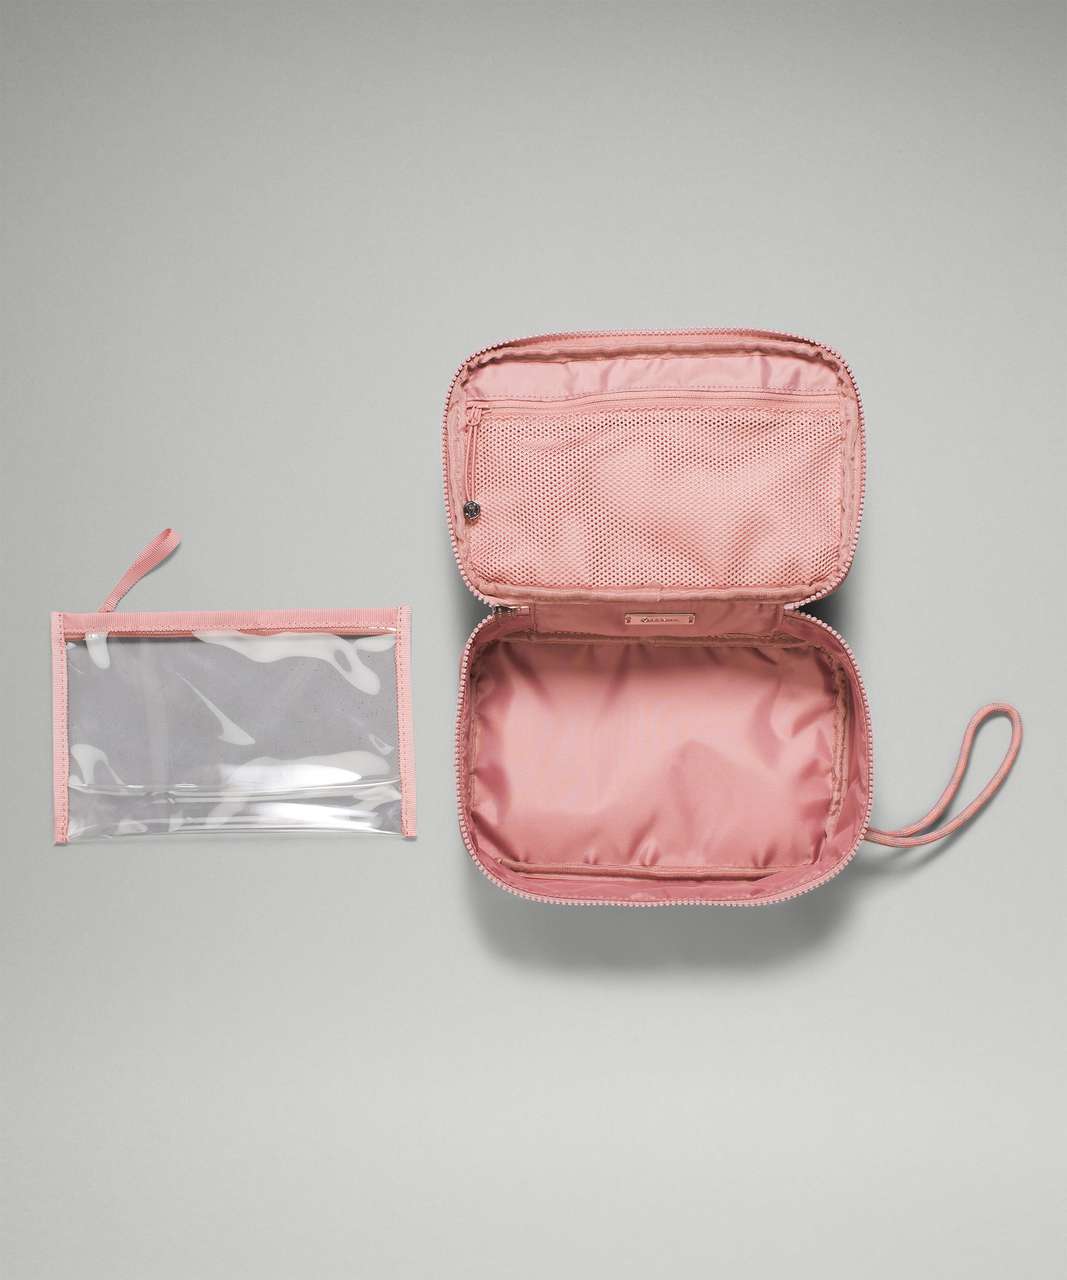 Lululemon Small things Count Kit - Pink Pastel